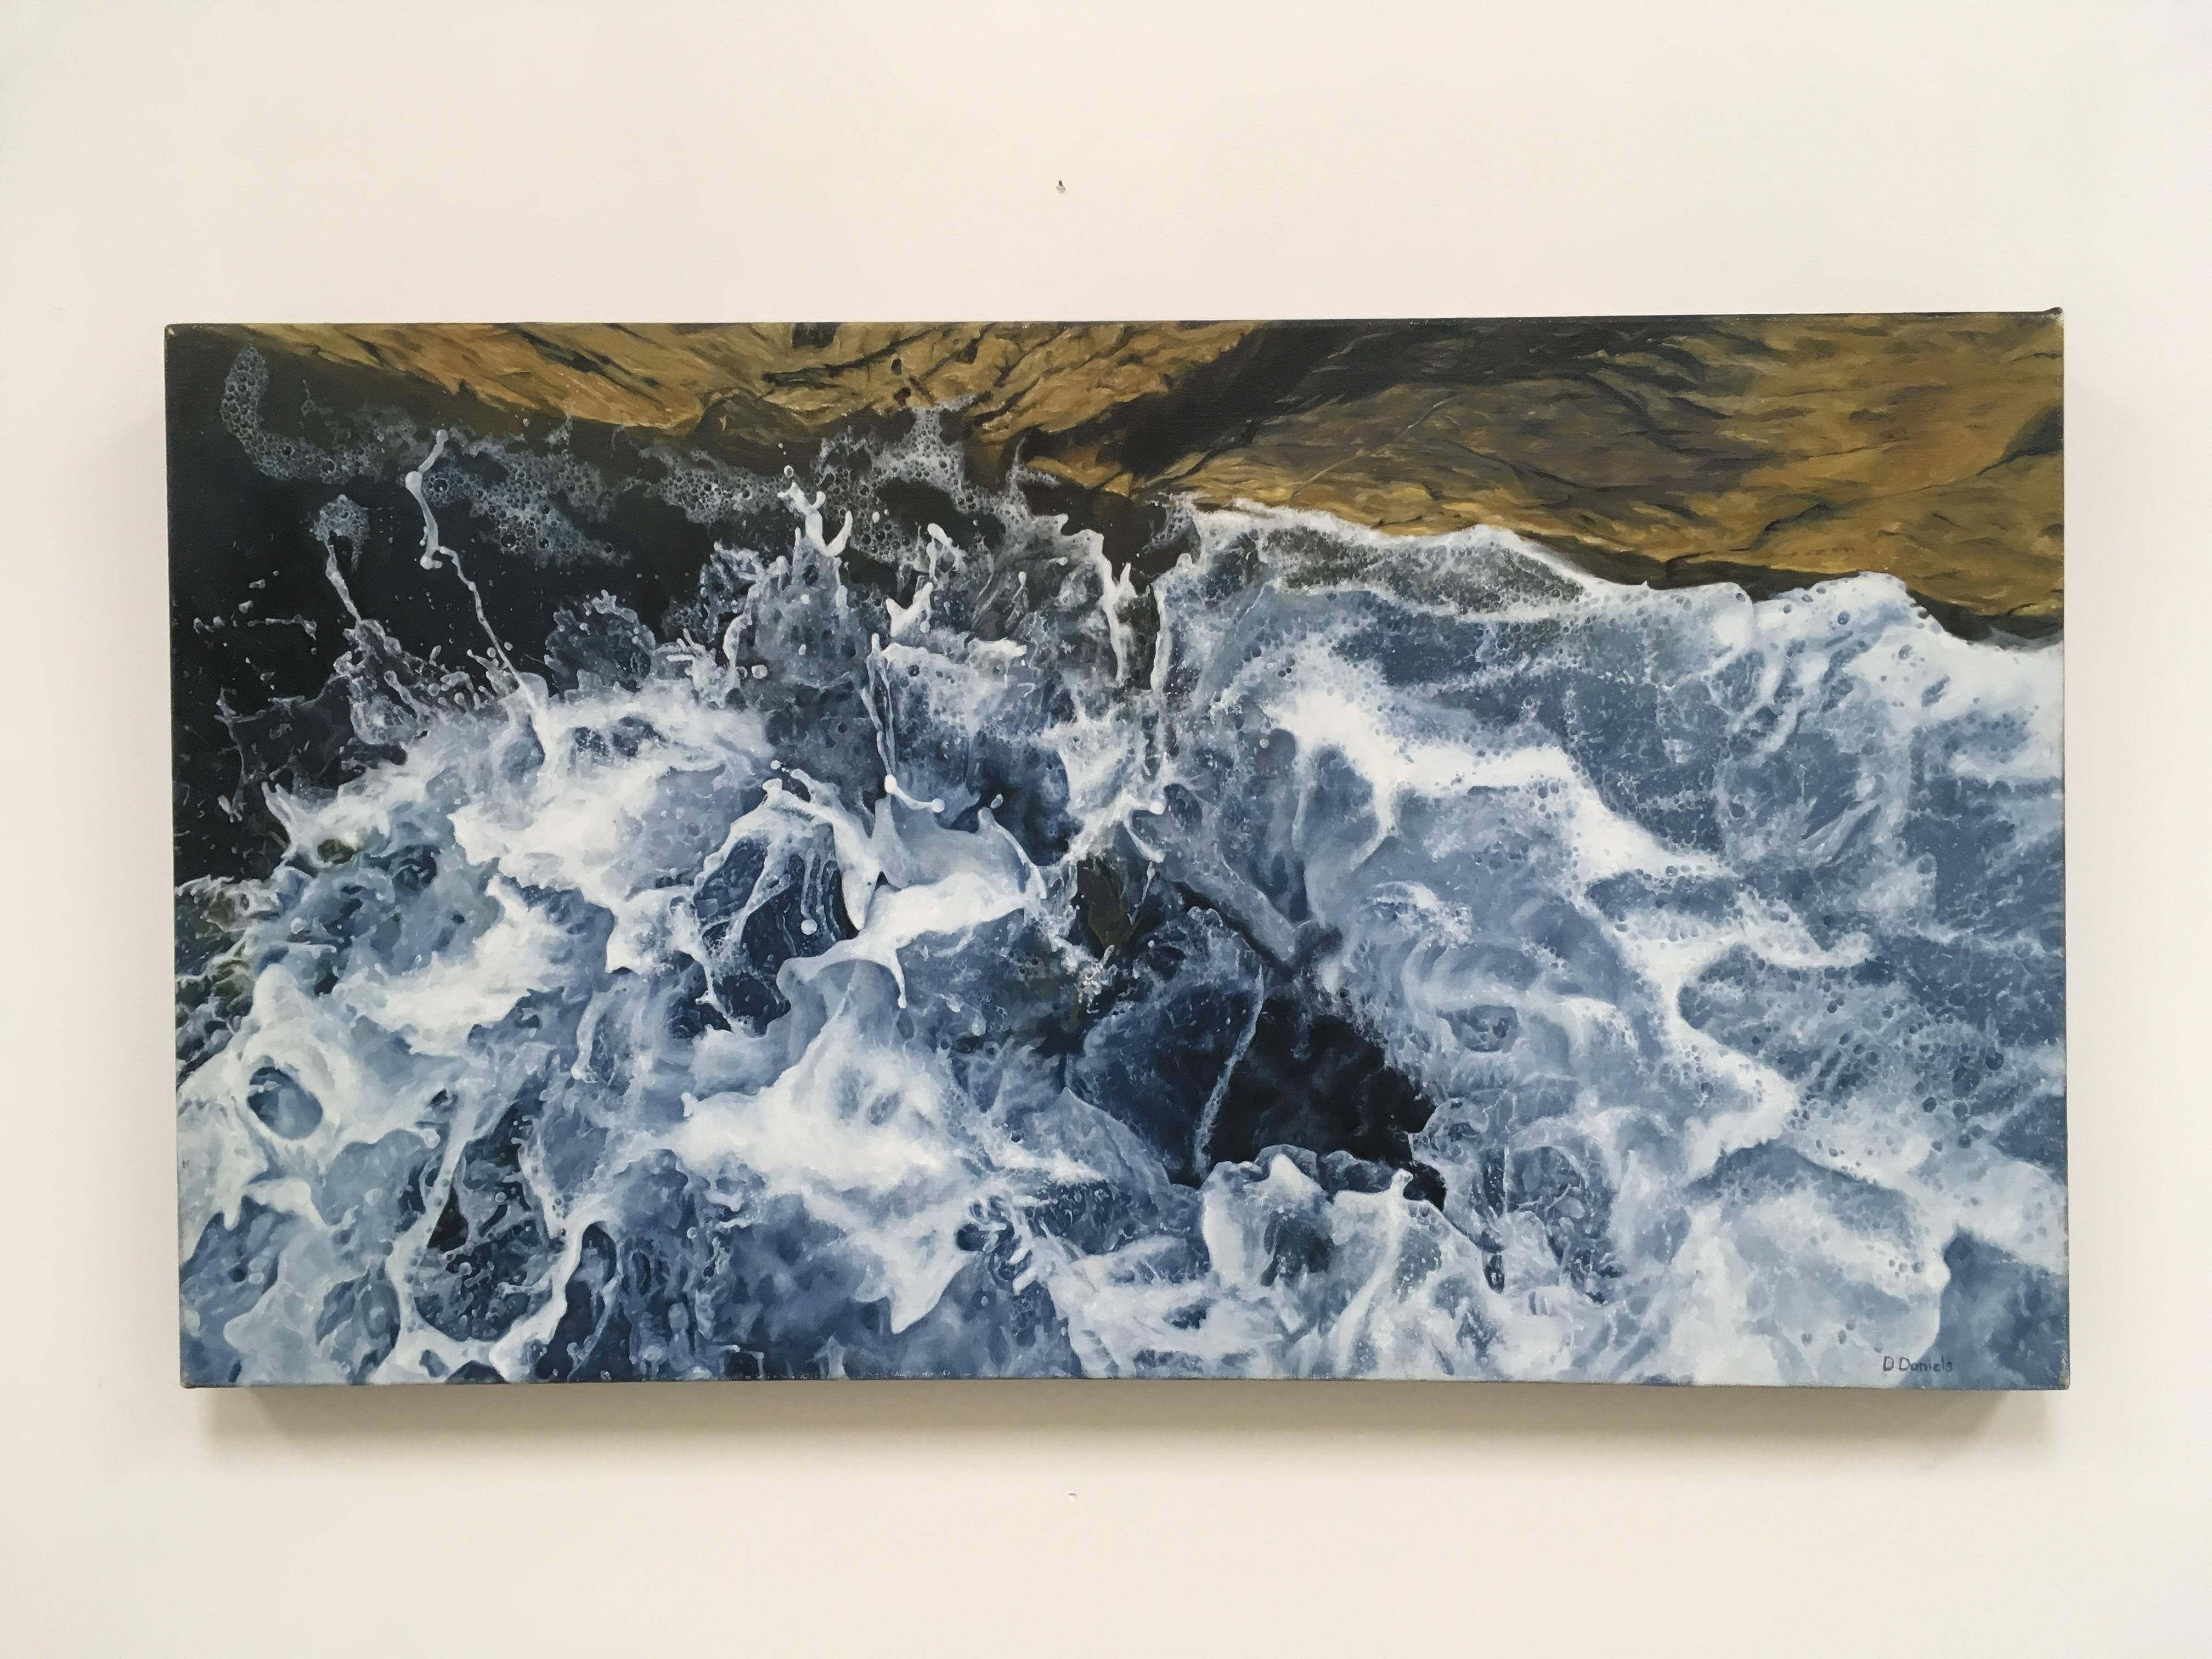 <p>Artist Comments<br>This tide pool was surging with water and foam as the tide came rushing in. The water was active, rushing and alive, as if it were eager to arrive at high tide.</p><br/><p>About the Artist<br>Photorealist painter, Debbie